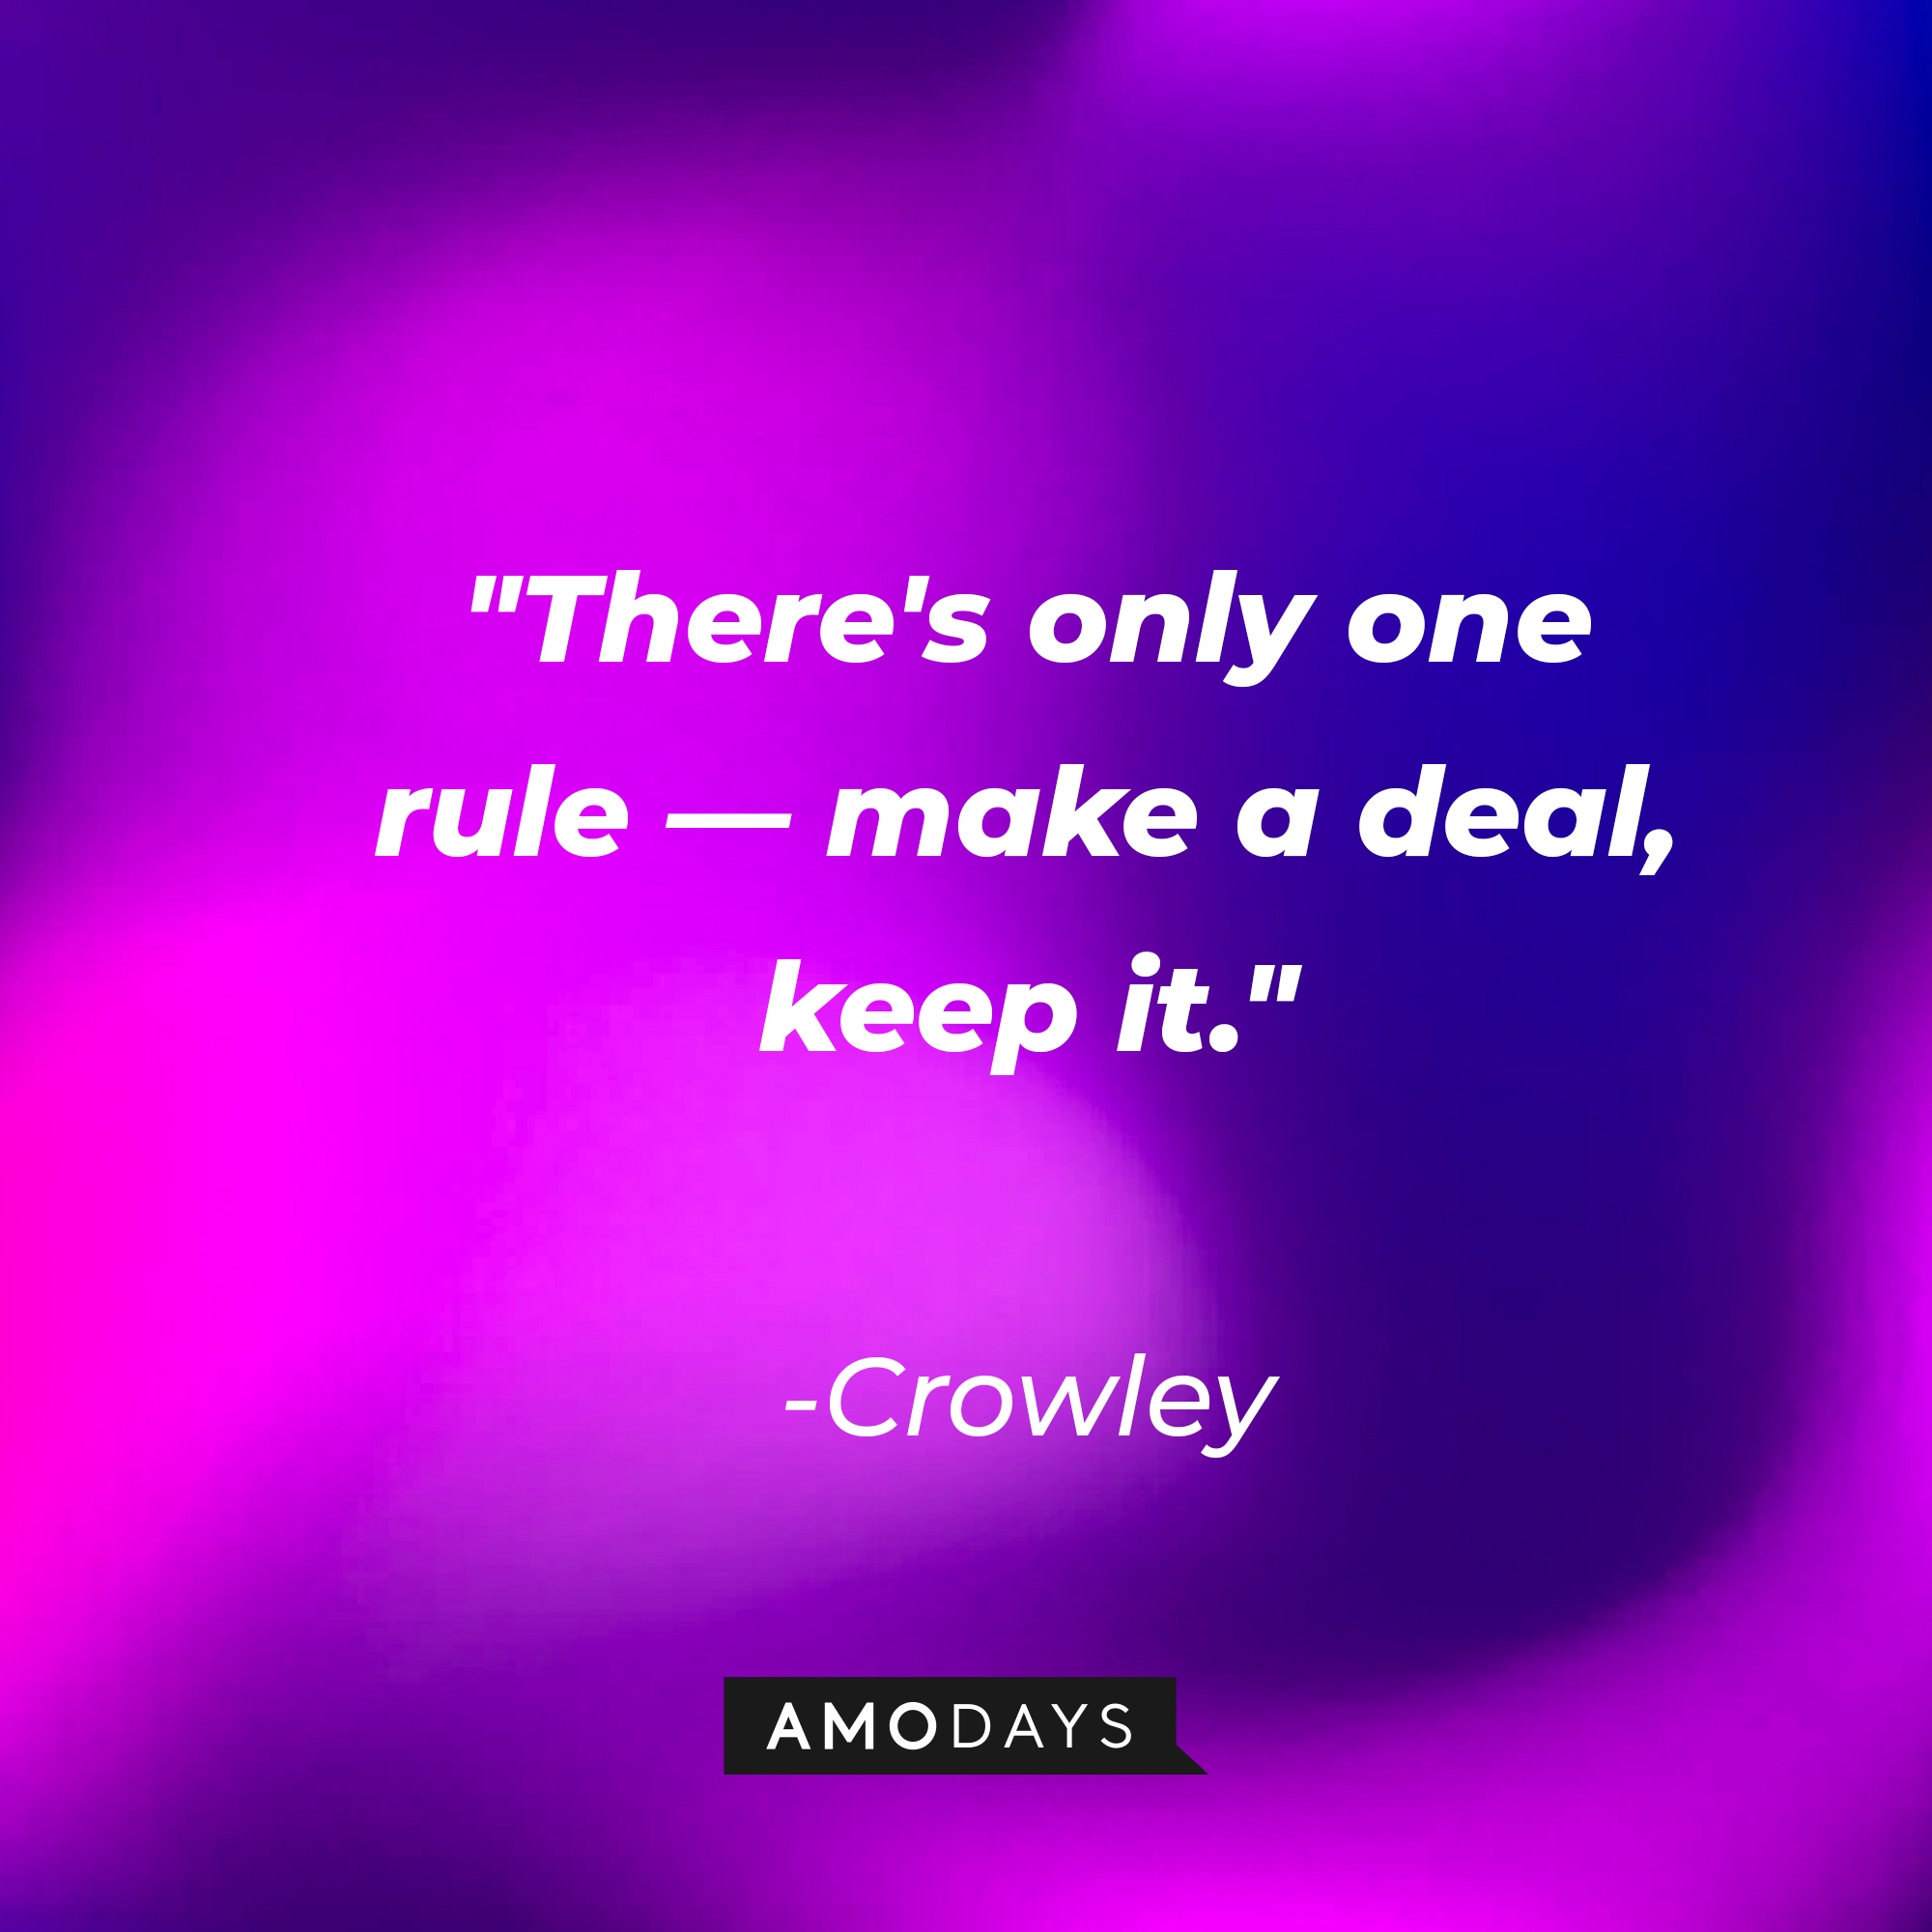 Crowley’s quote: "There's only one rule—make a deal, keep it." | Source: AmoDays